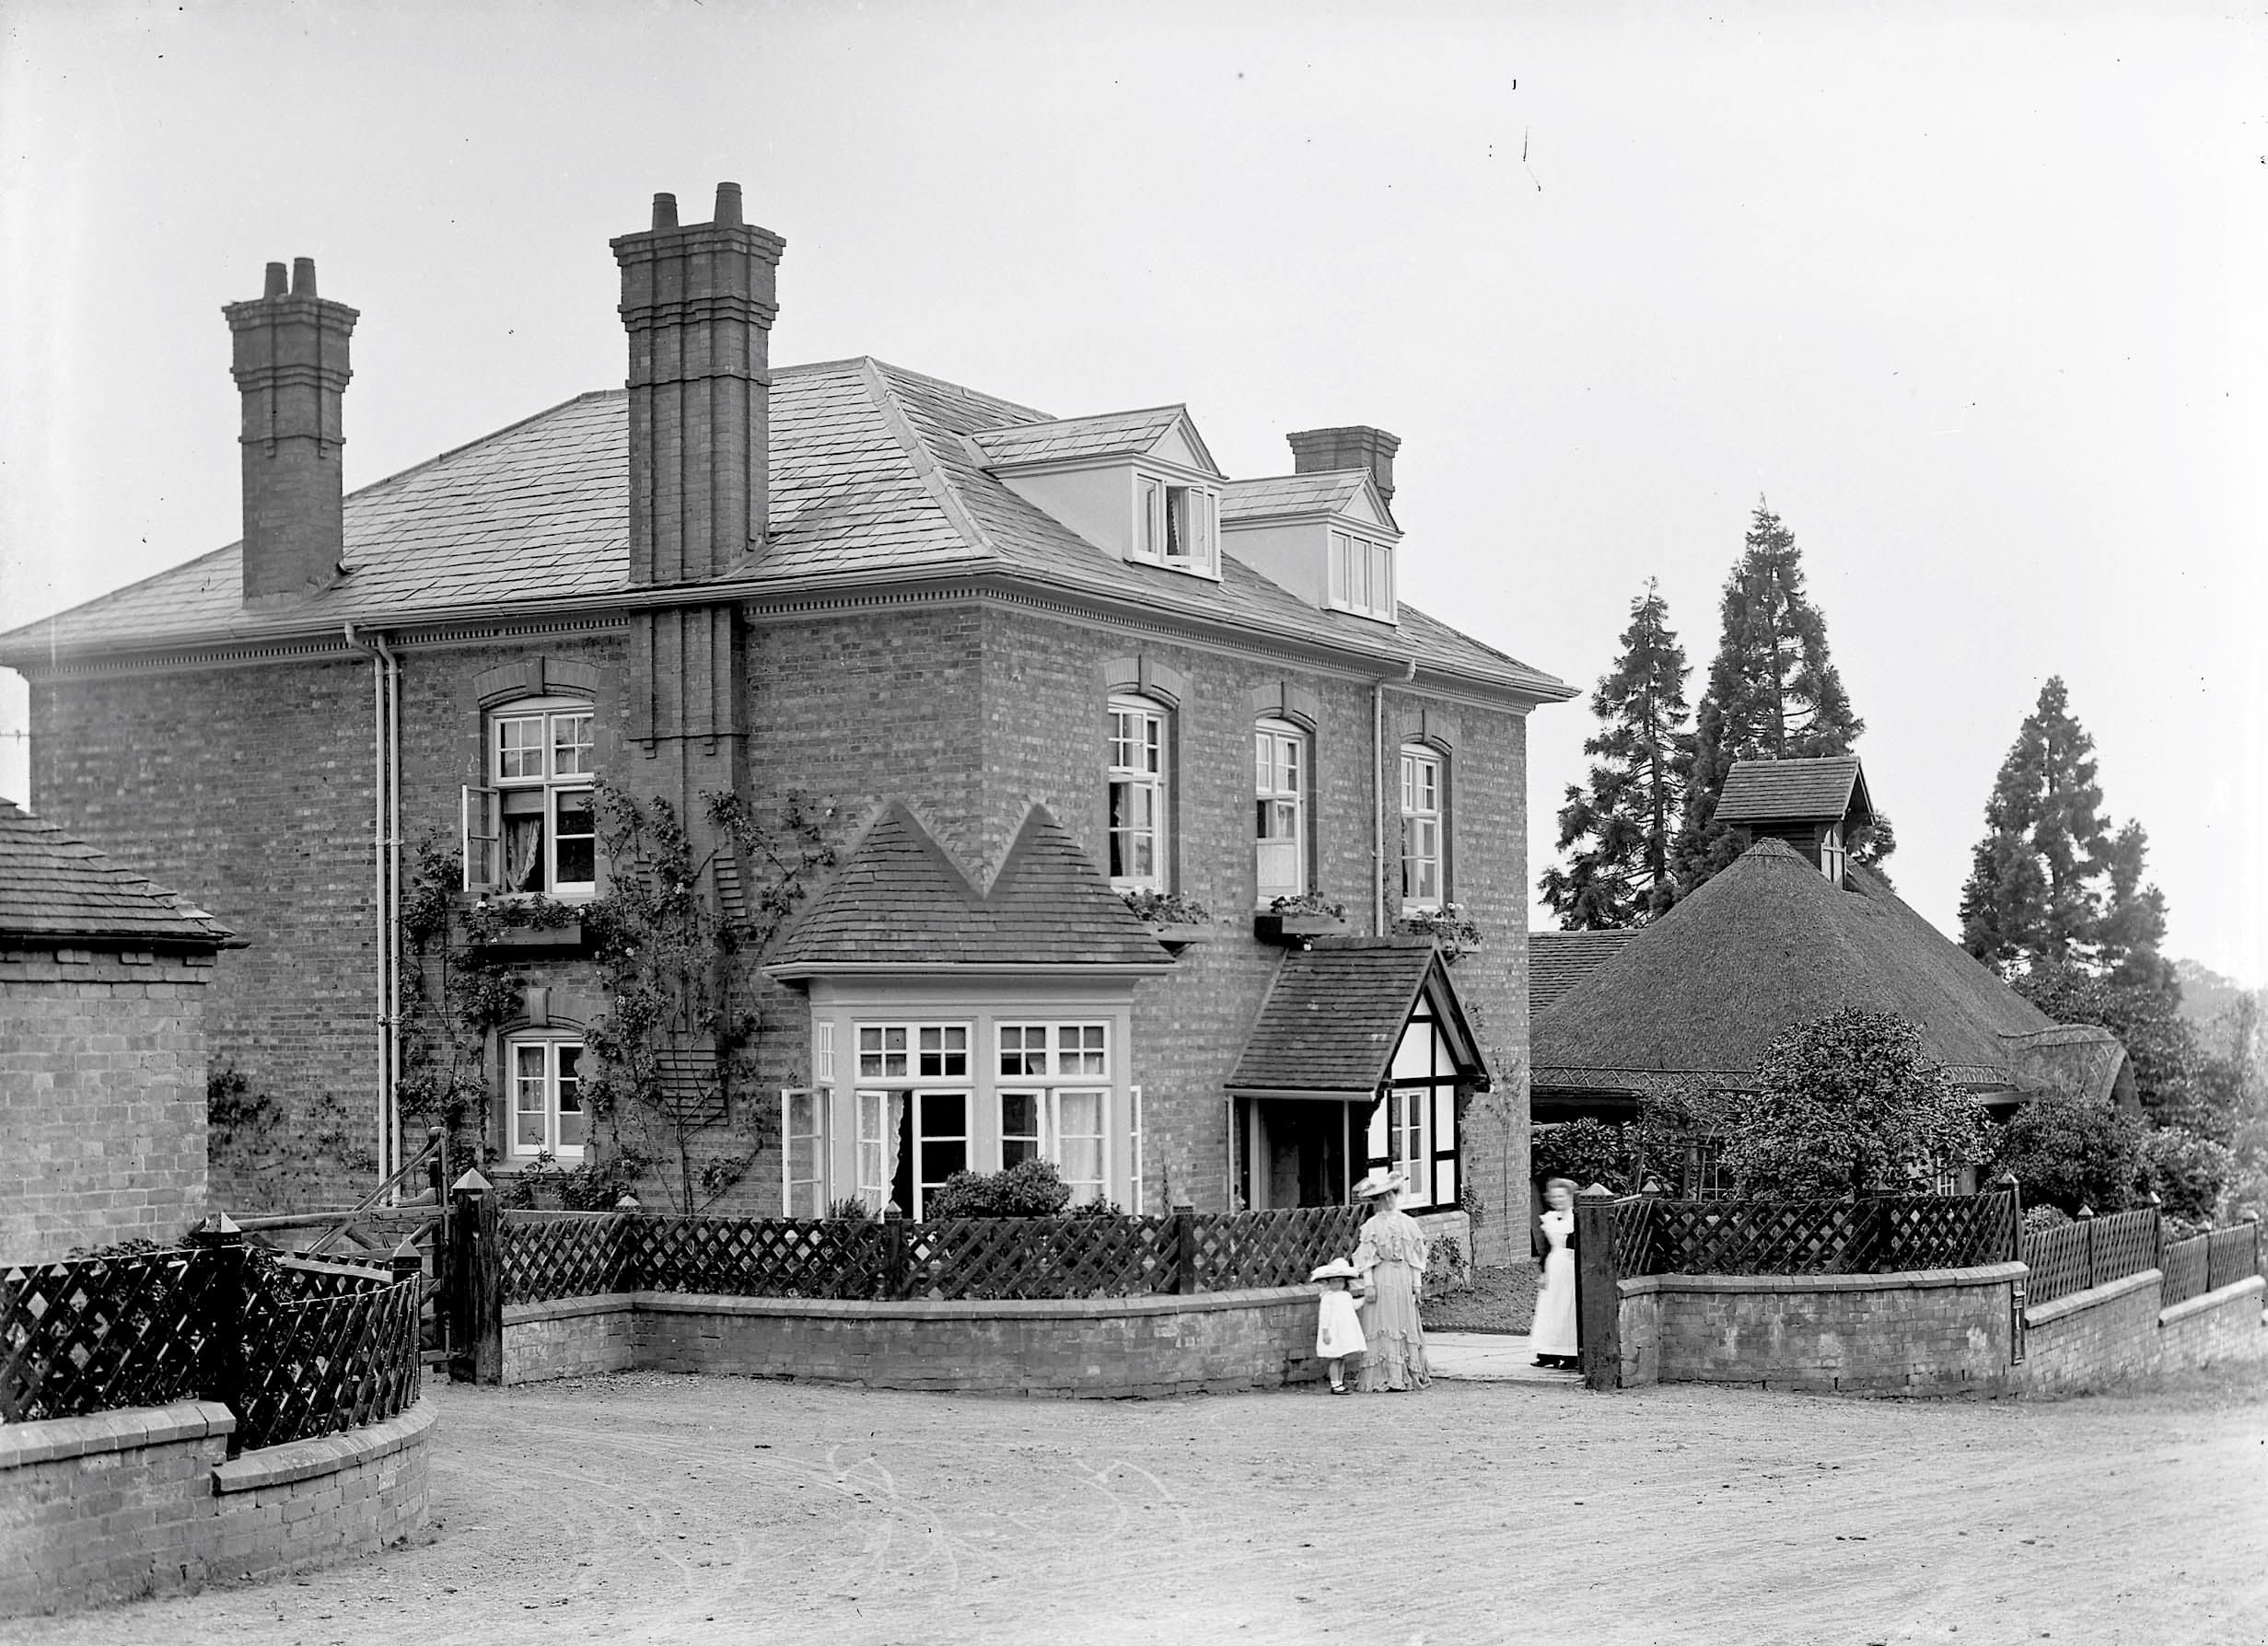 Black and white photograph of a sizeable brick house known as Hindlip Rectory.